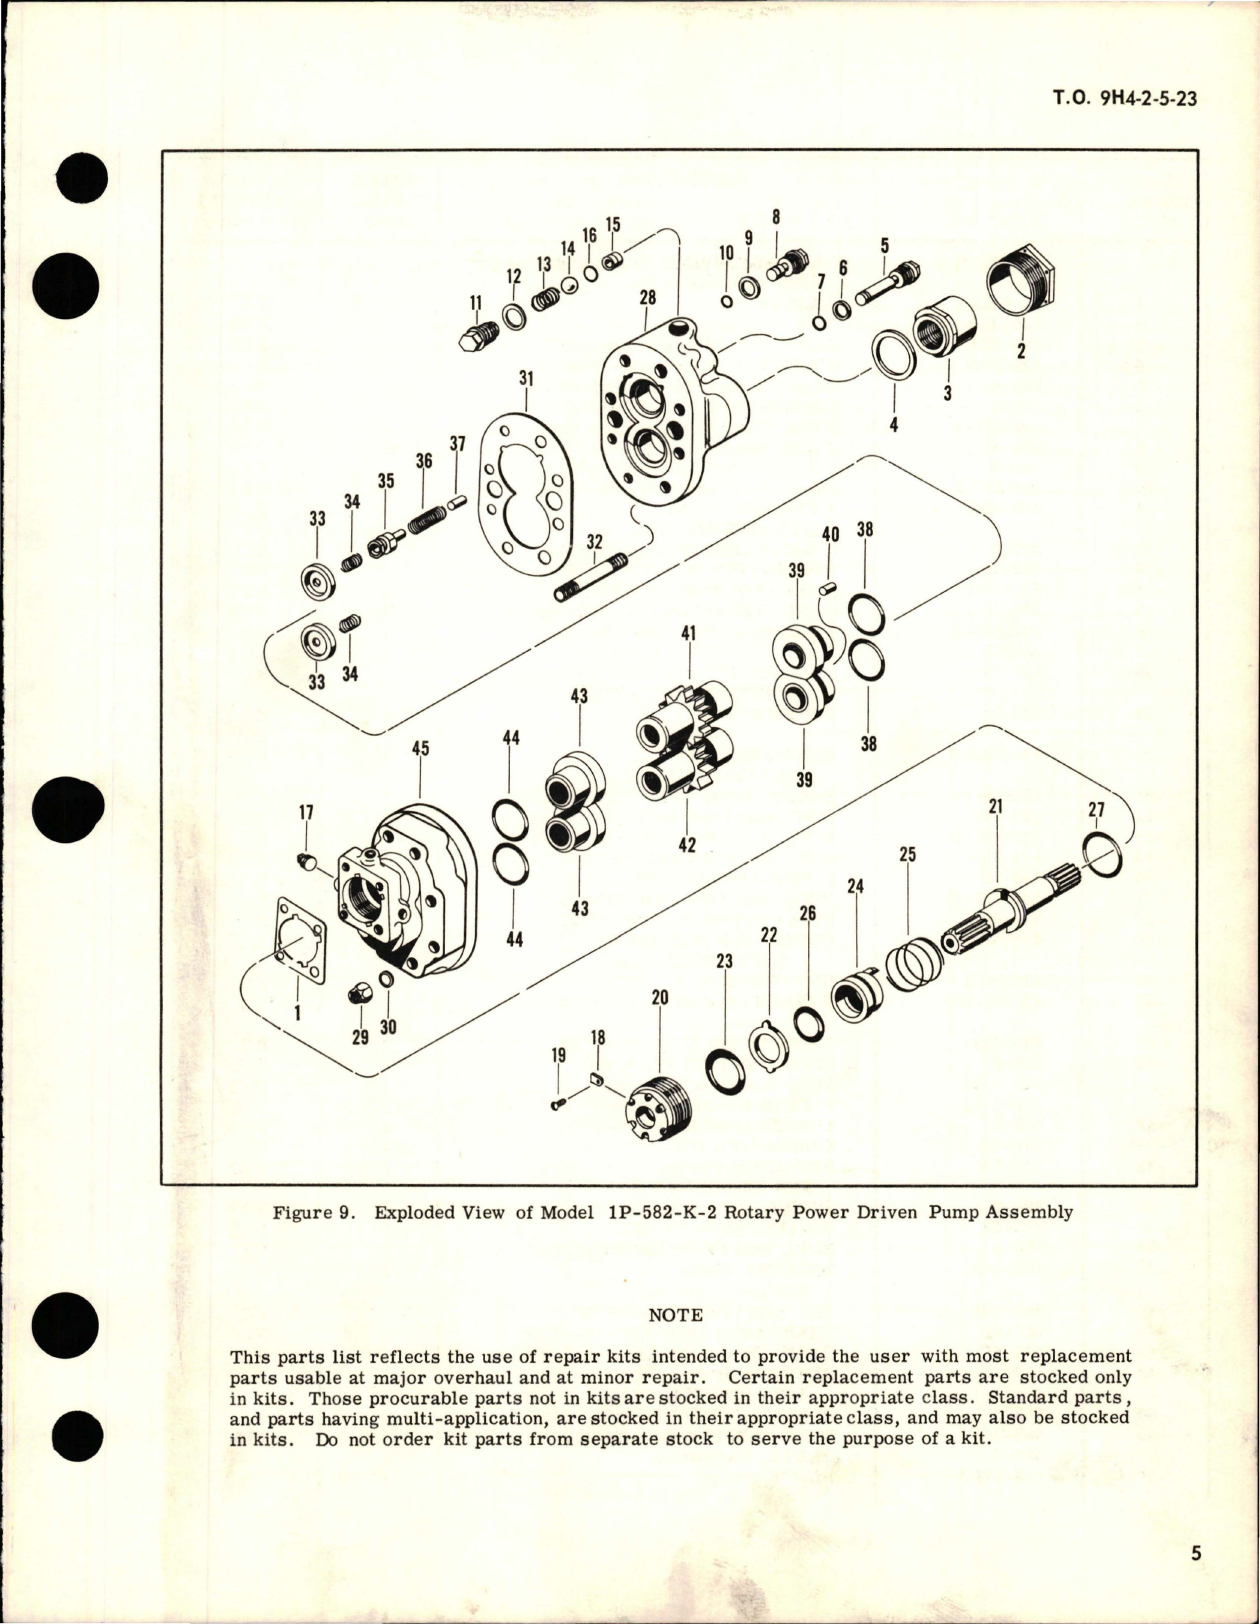 Sample page 5 from AirCorps Library document: Overhaul with Parts Breakdown for Rotary Power Driven Pump Assembly - Model 1P-582-K-2 